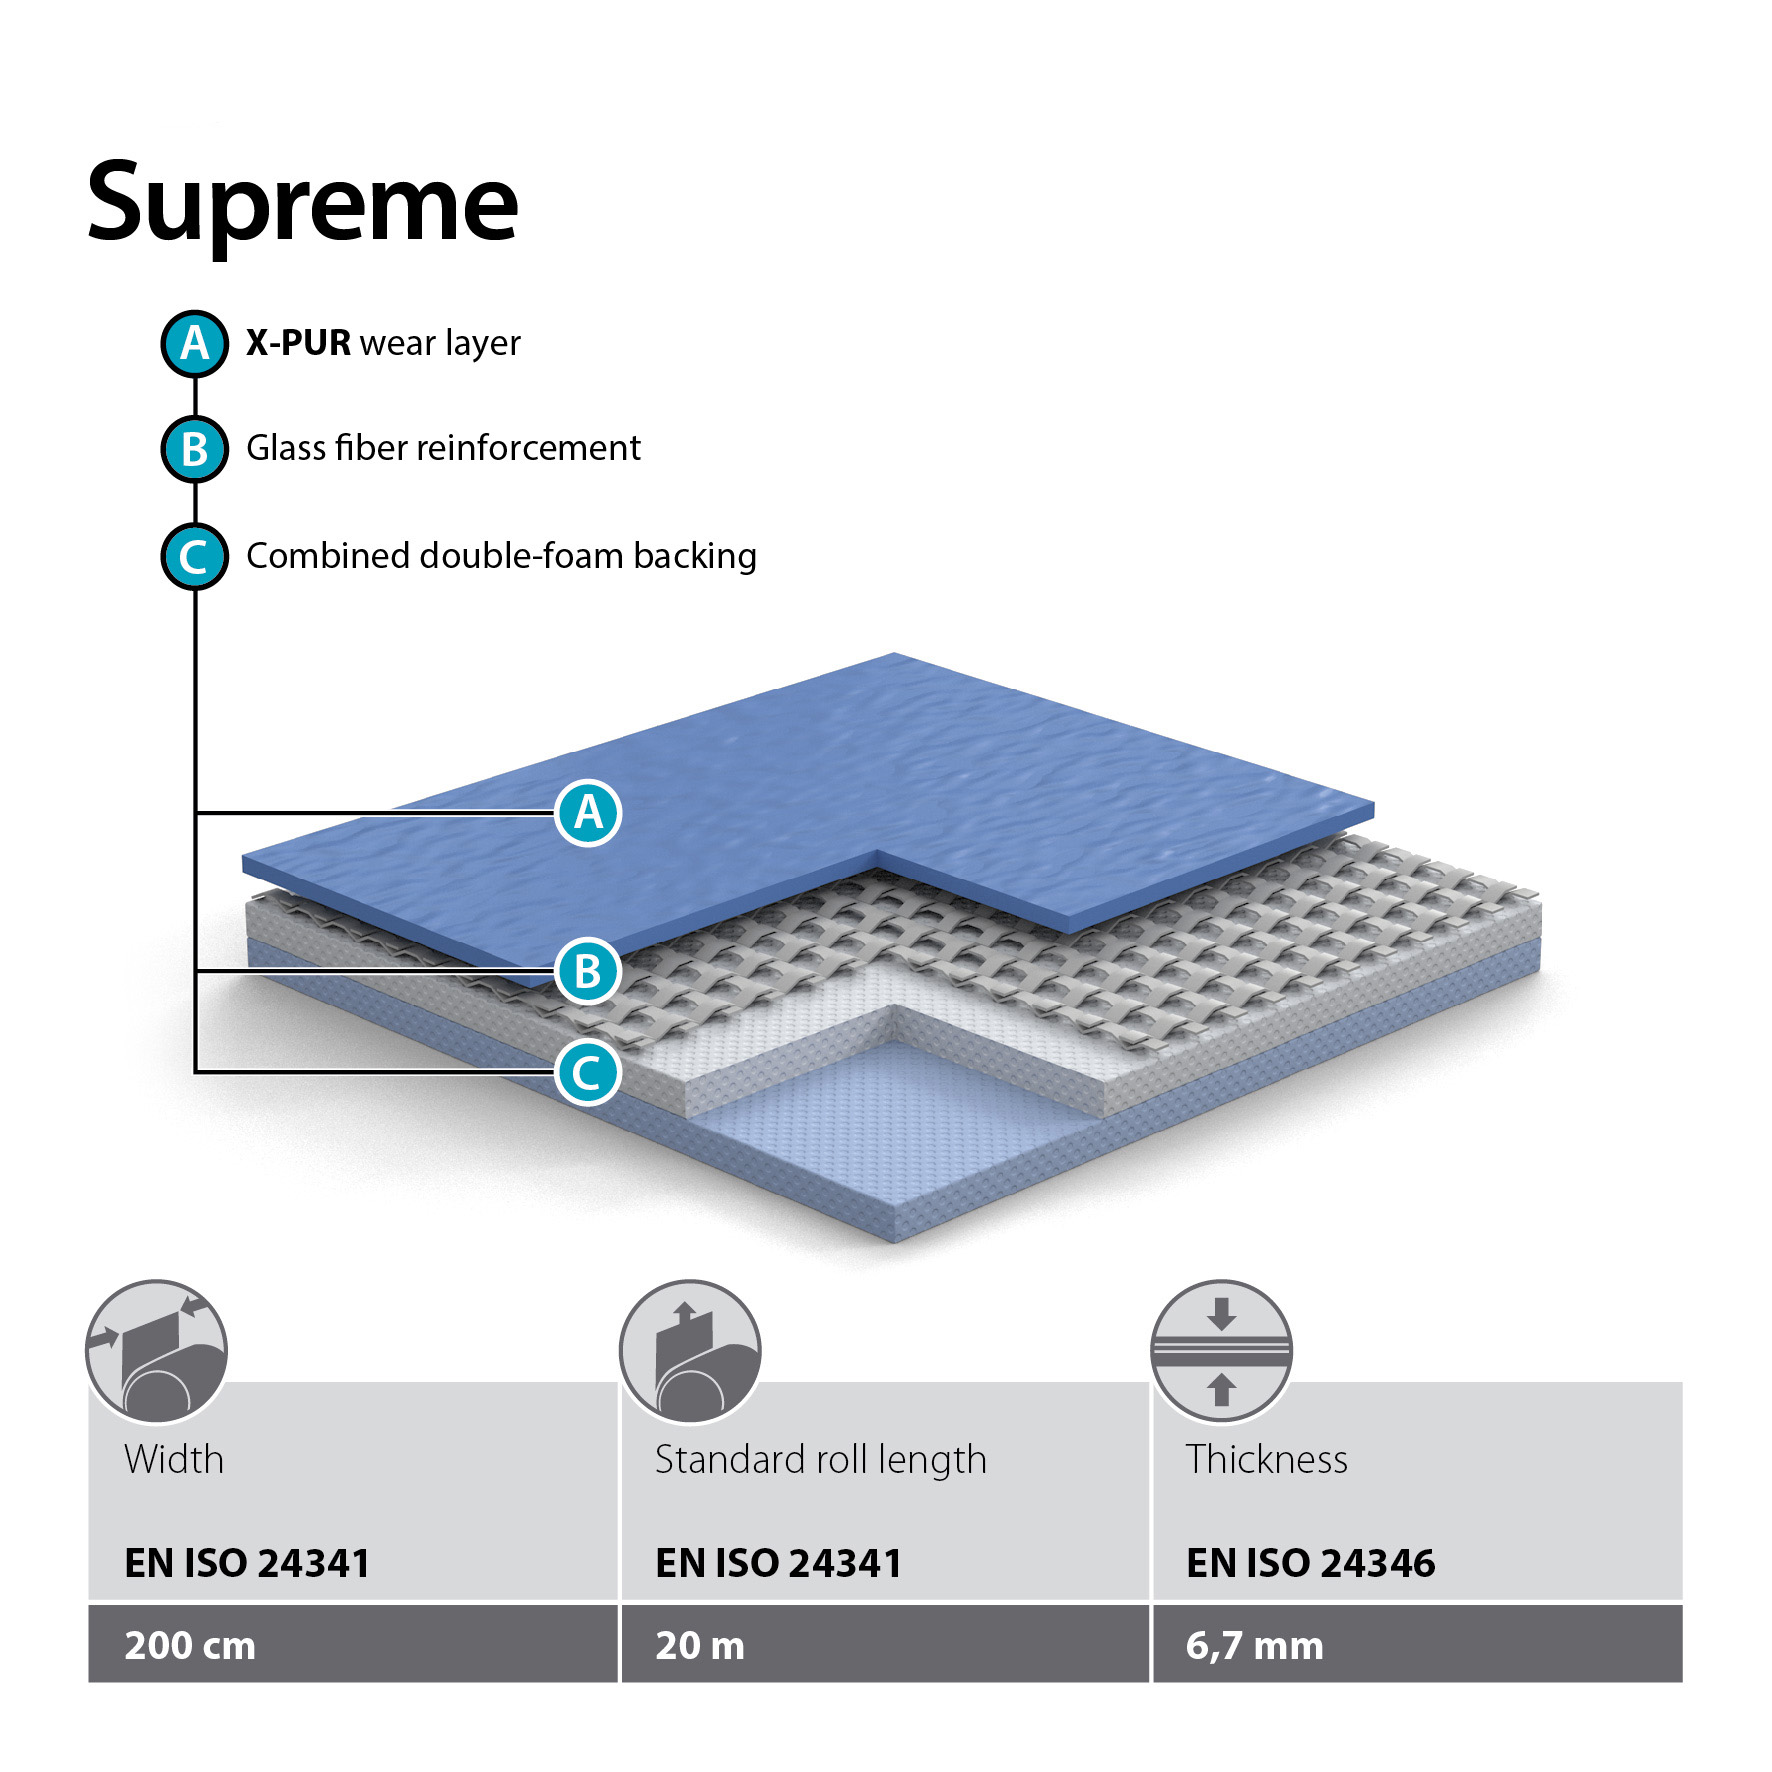 Graboplast's new sports floorings with X-PUR surface - GraboSport Supreme